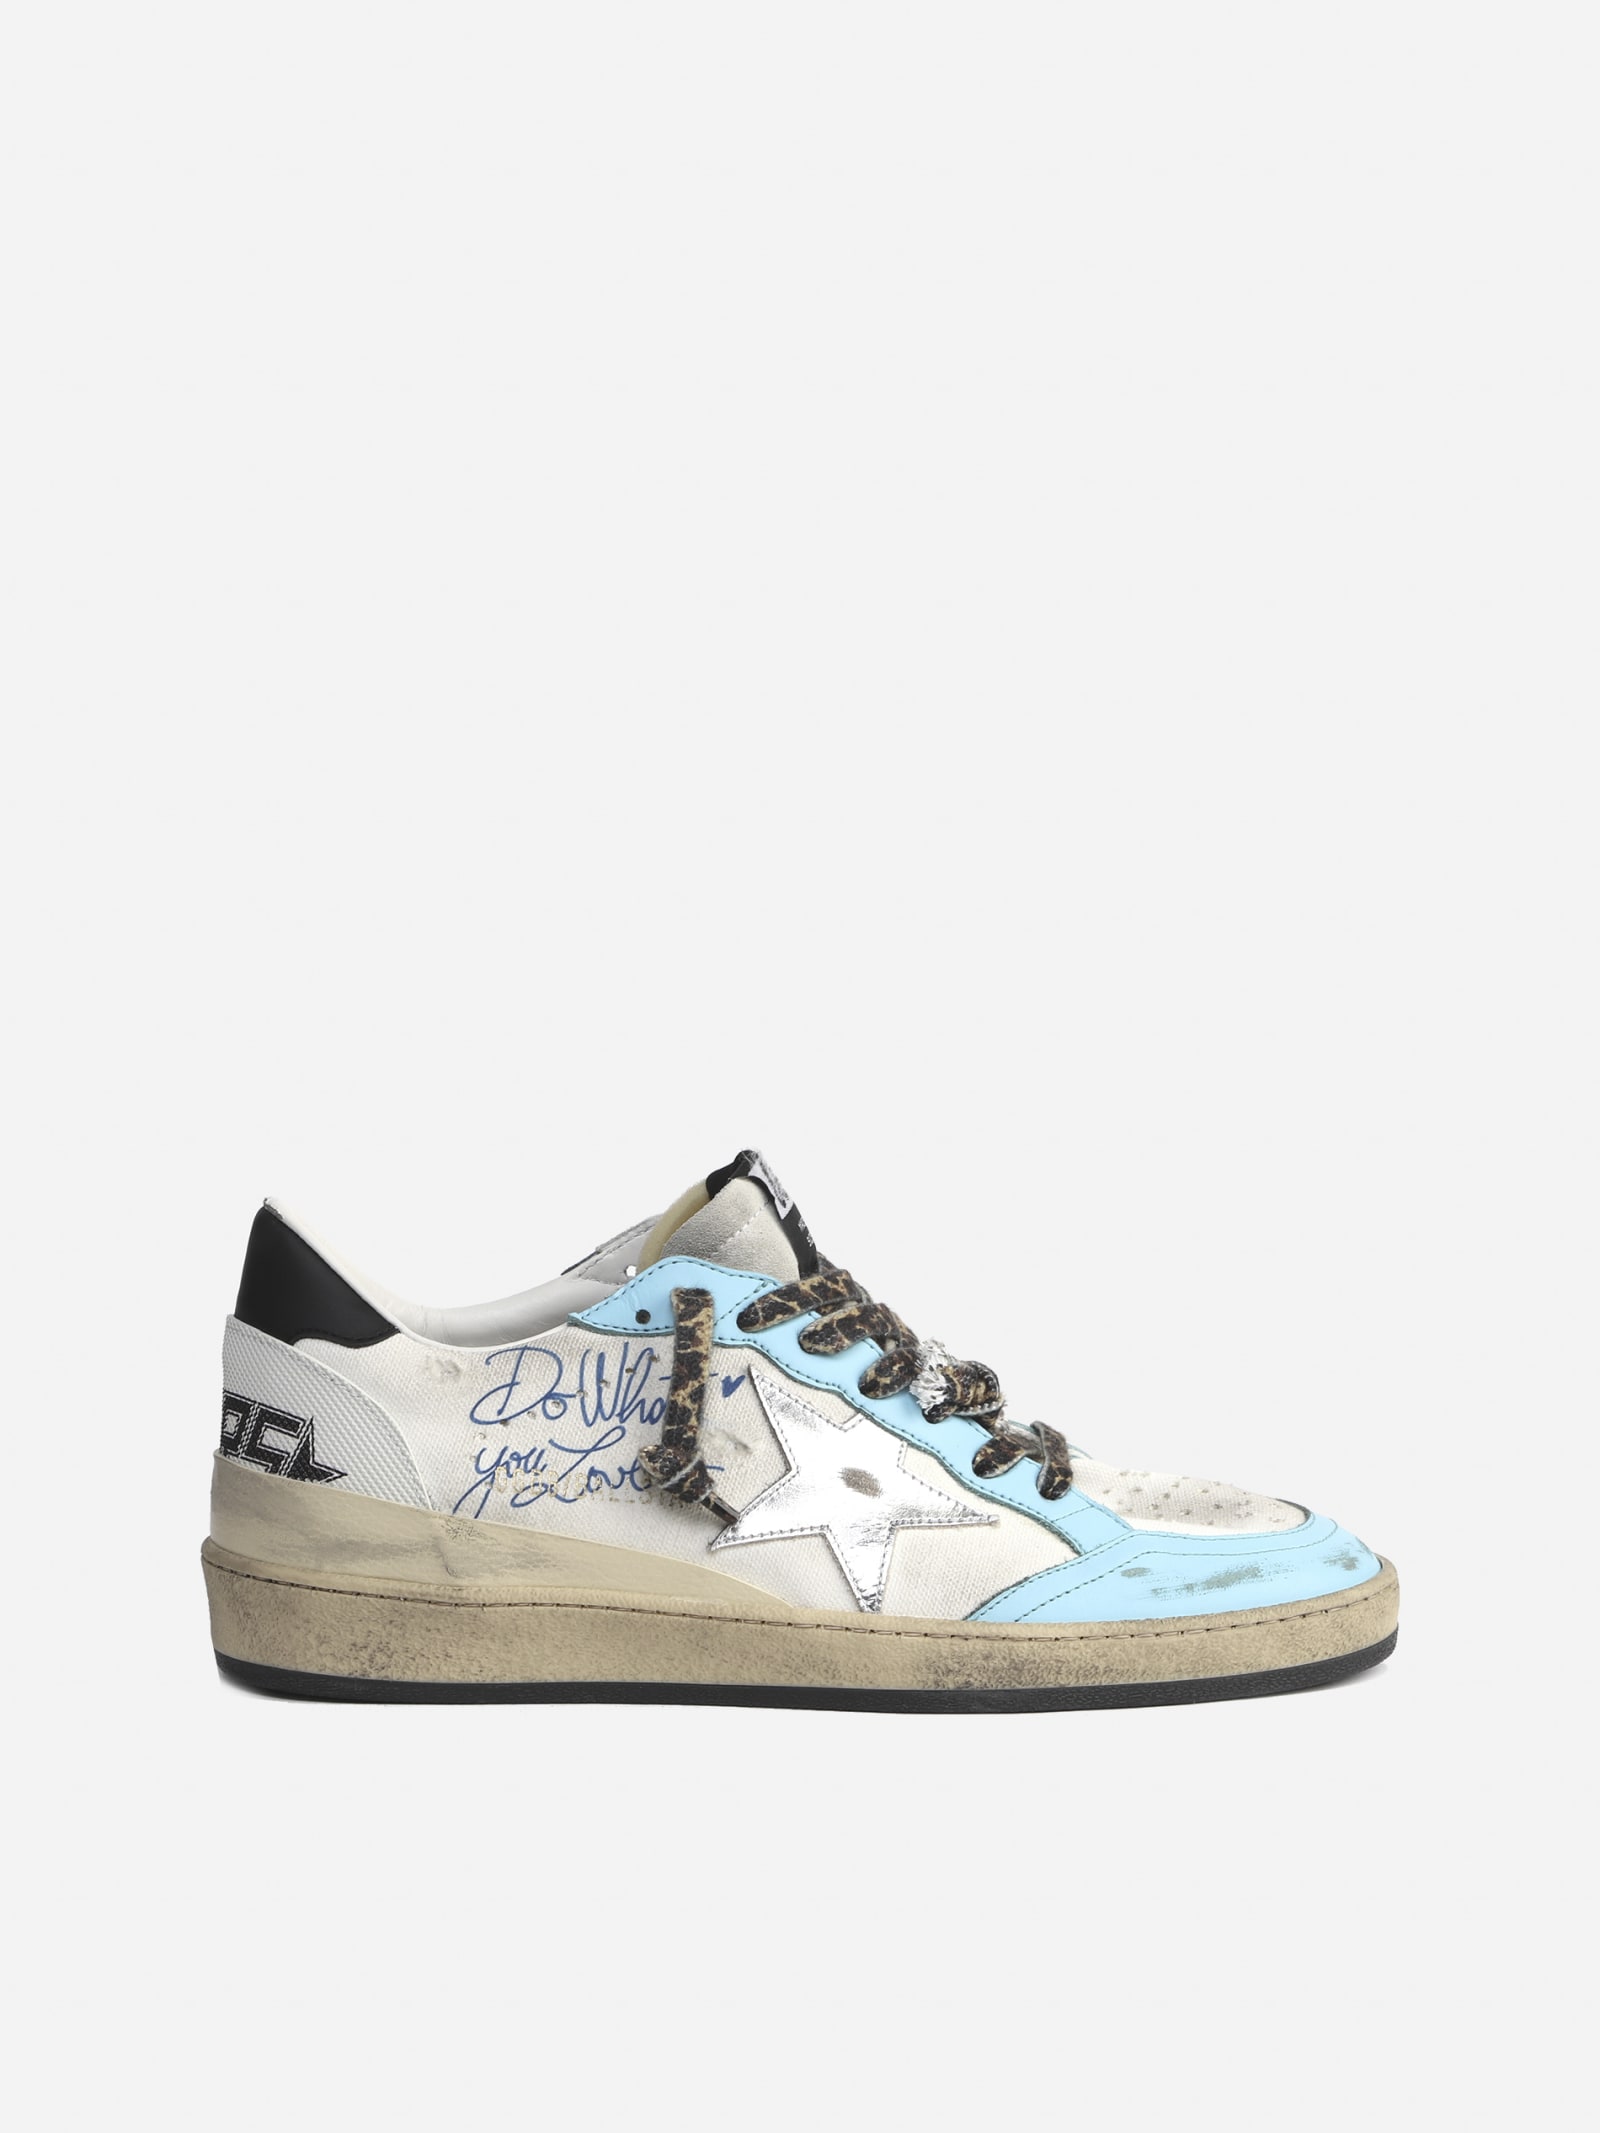 Golden Goose Ball Star Sneakers In Canvas With Leather Inserts